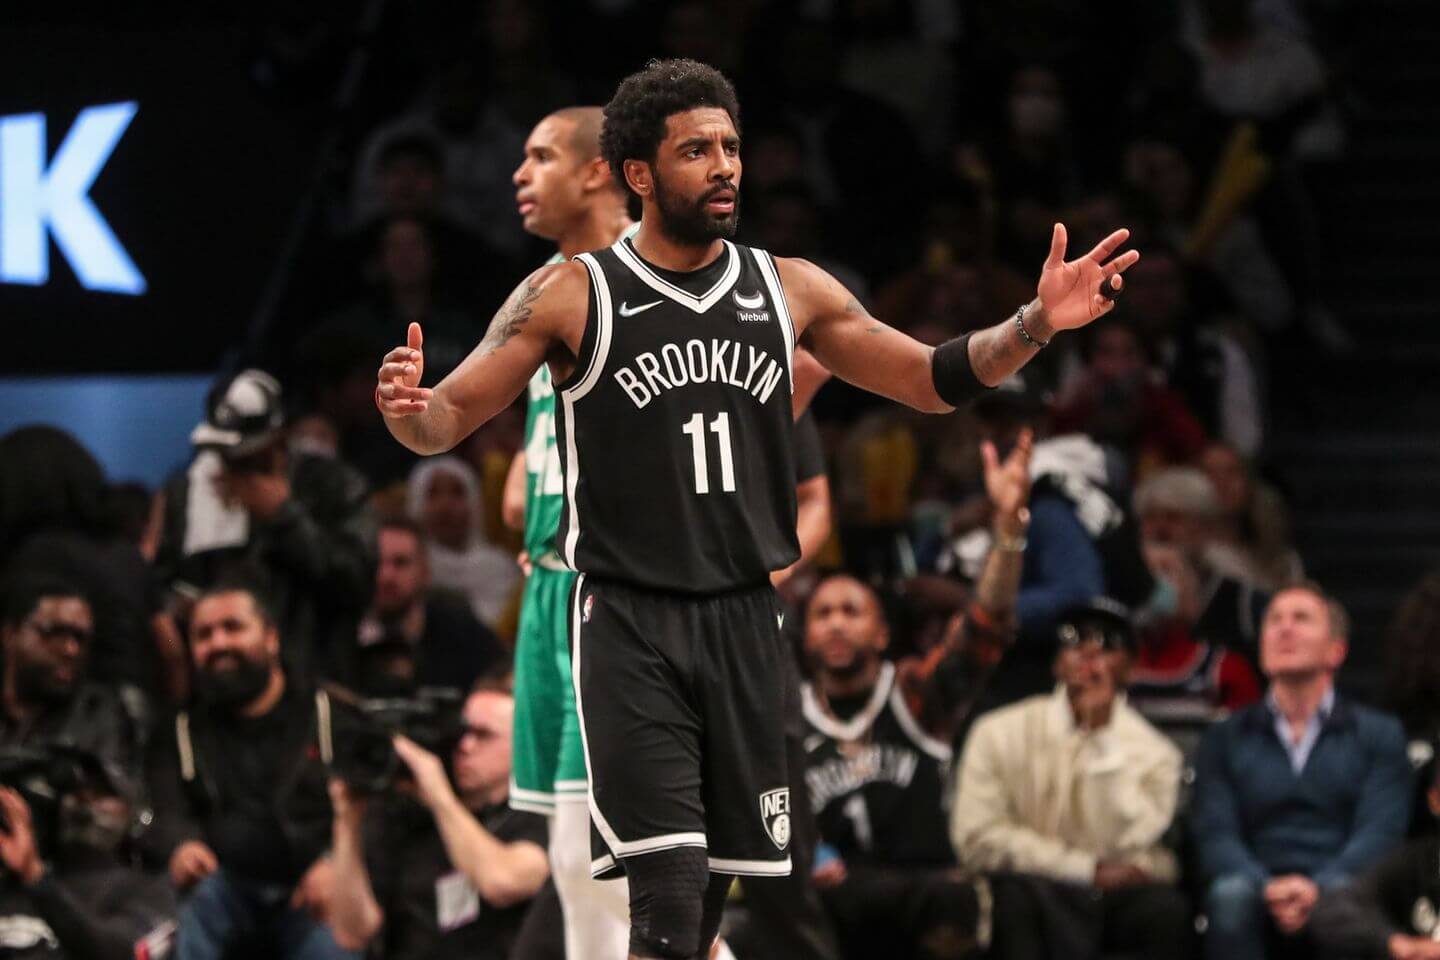 Nets GM not ready to commit to Kyrie Irving long term: 'We need people here that want to be here'